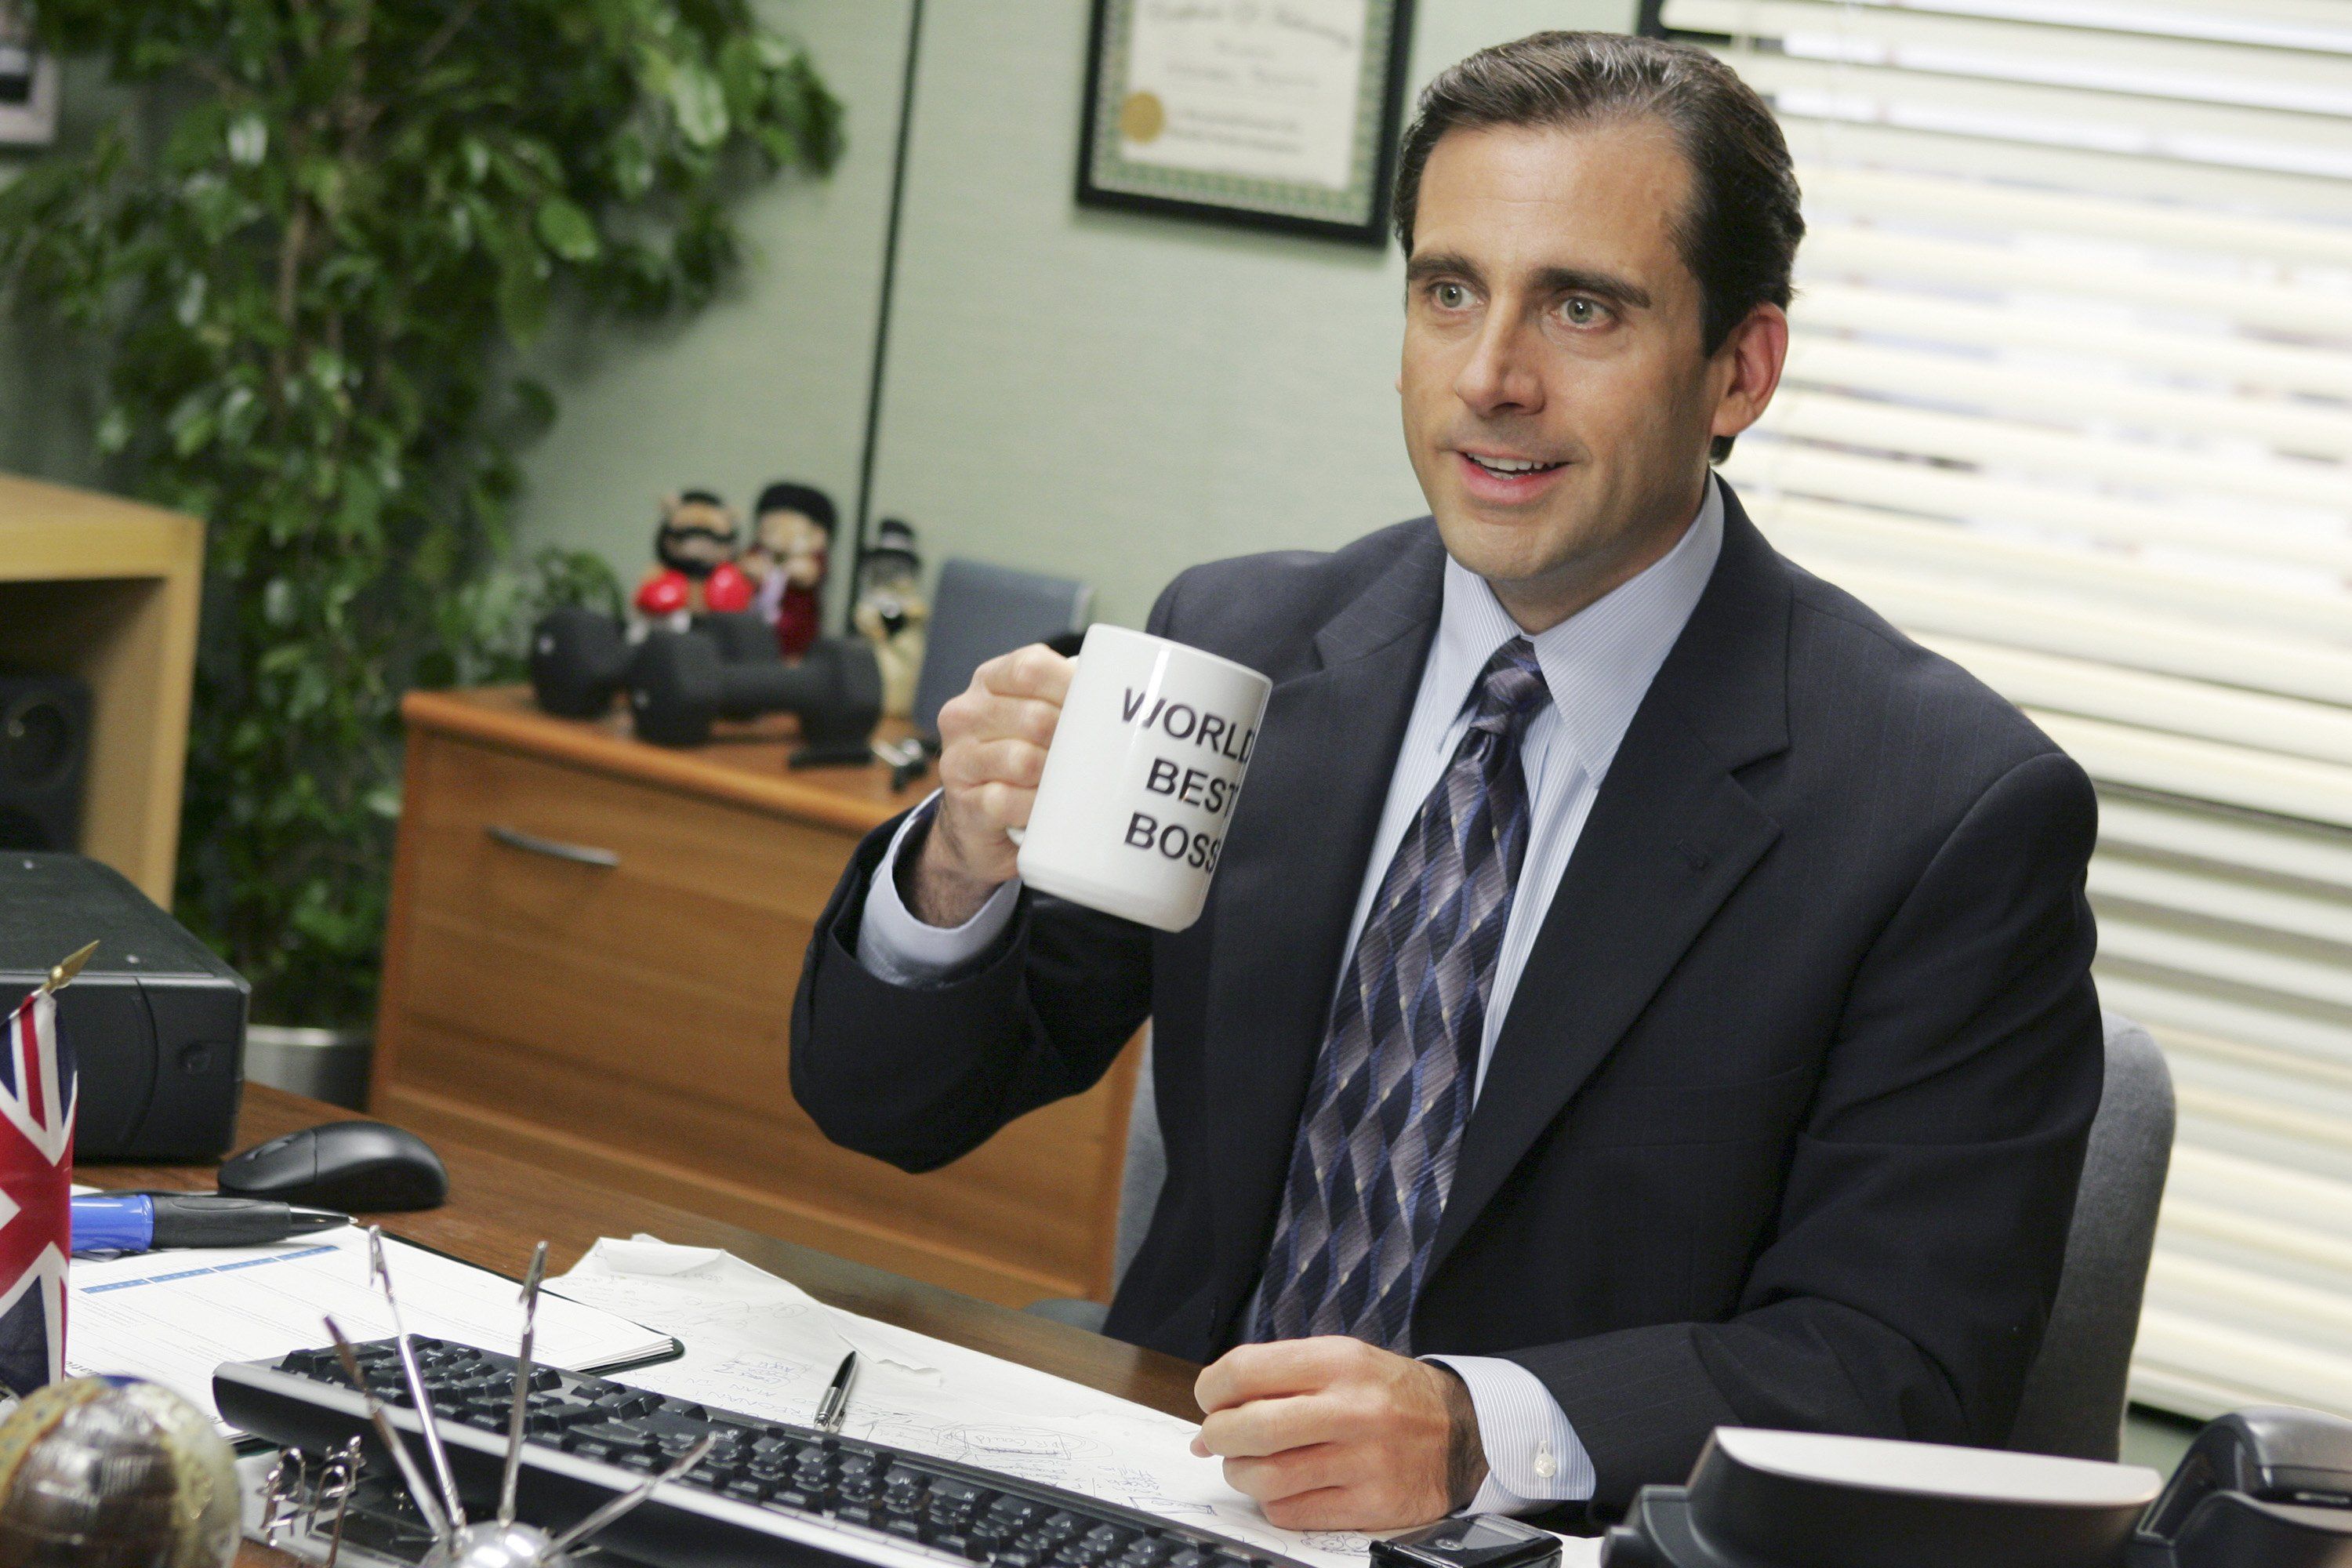 NBC May Bring Back The Office for New Season, but Without Steve